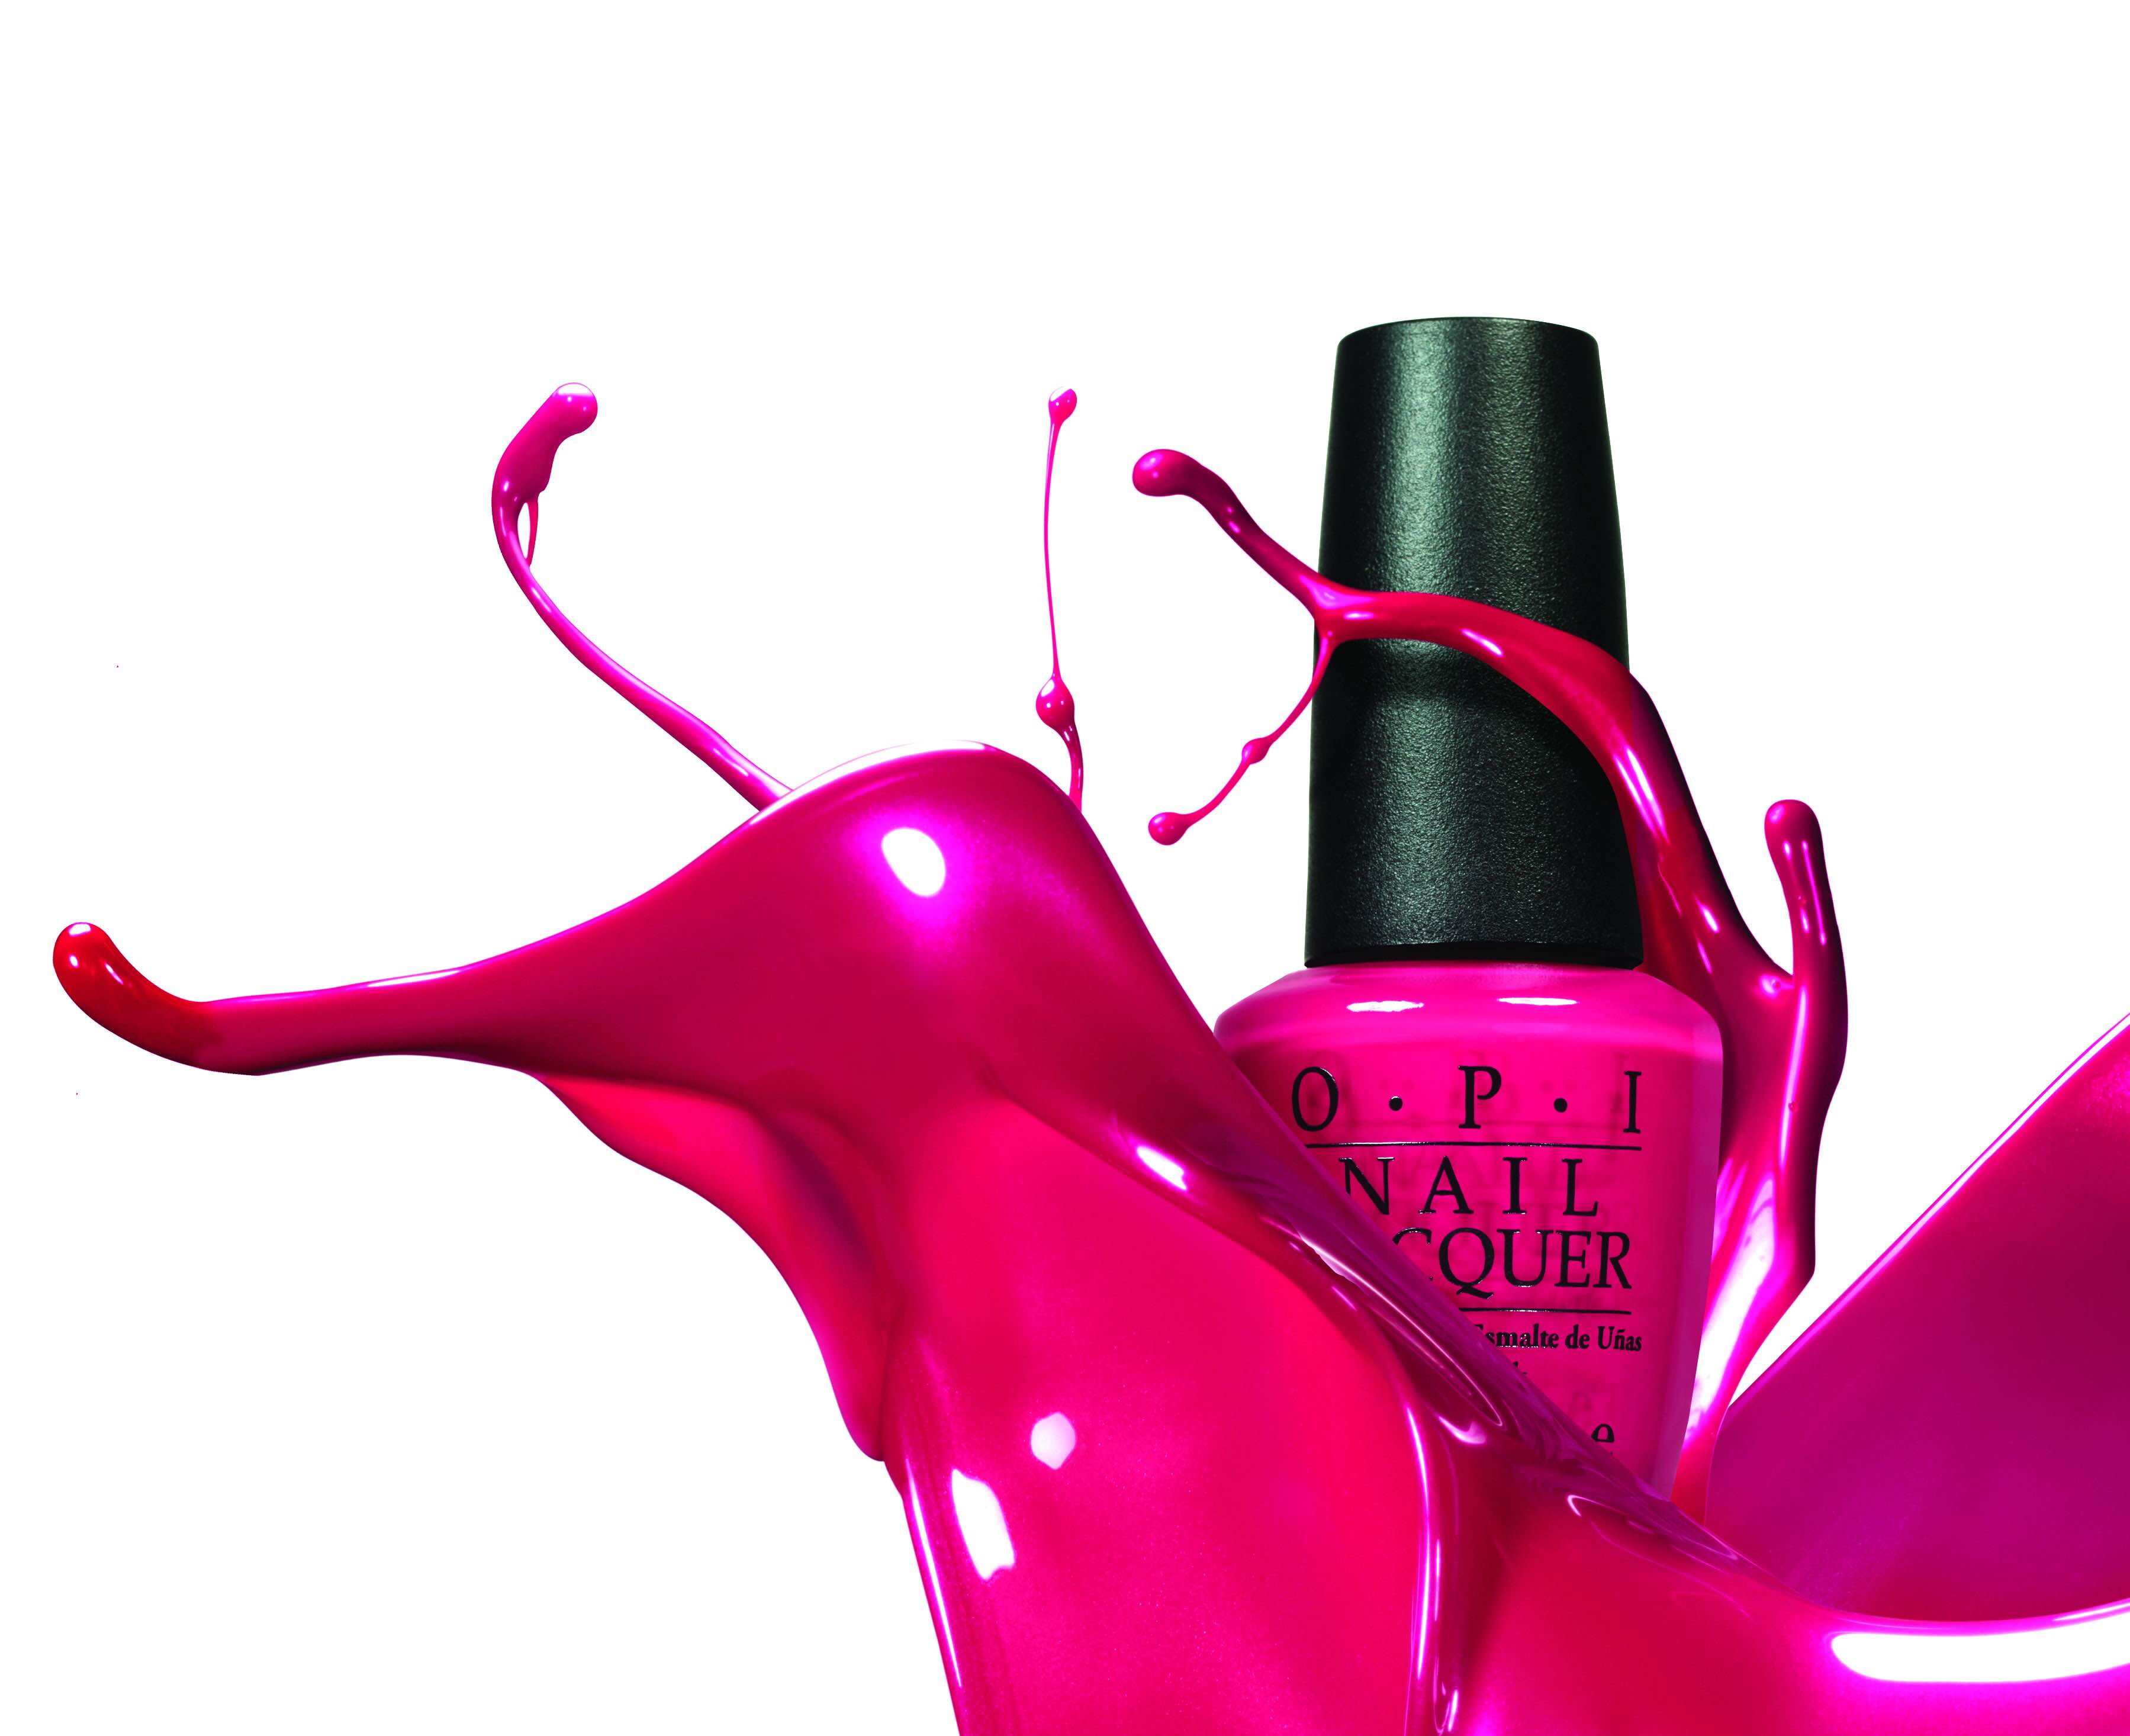 Opi Nail Polish Gel Manicure Kit And Footlogix For Sale Vayo